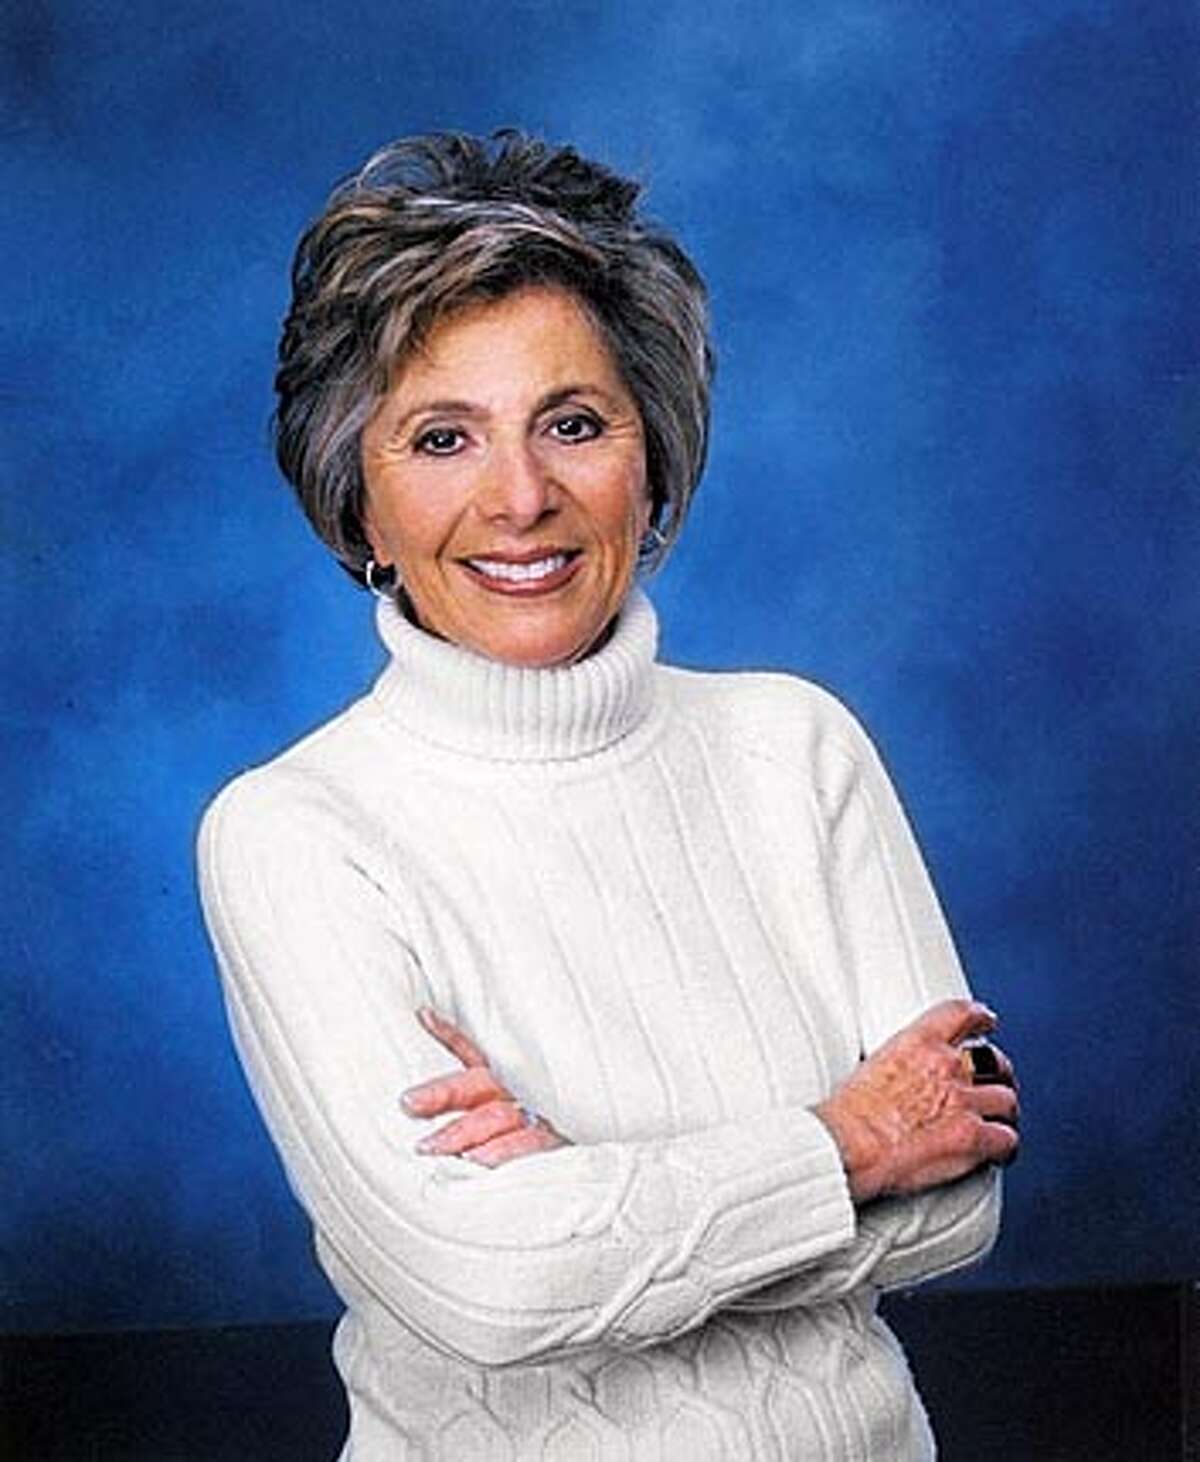 Barbara Boxer, author of "A Time to Run" HANDOUT / FOR USE WITH BOOK REVIEW ONLY